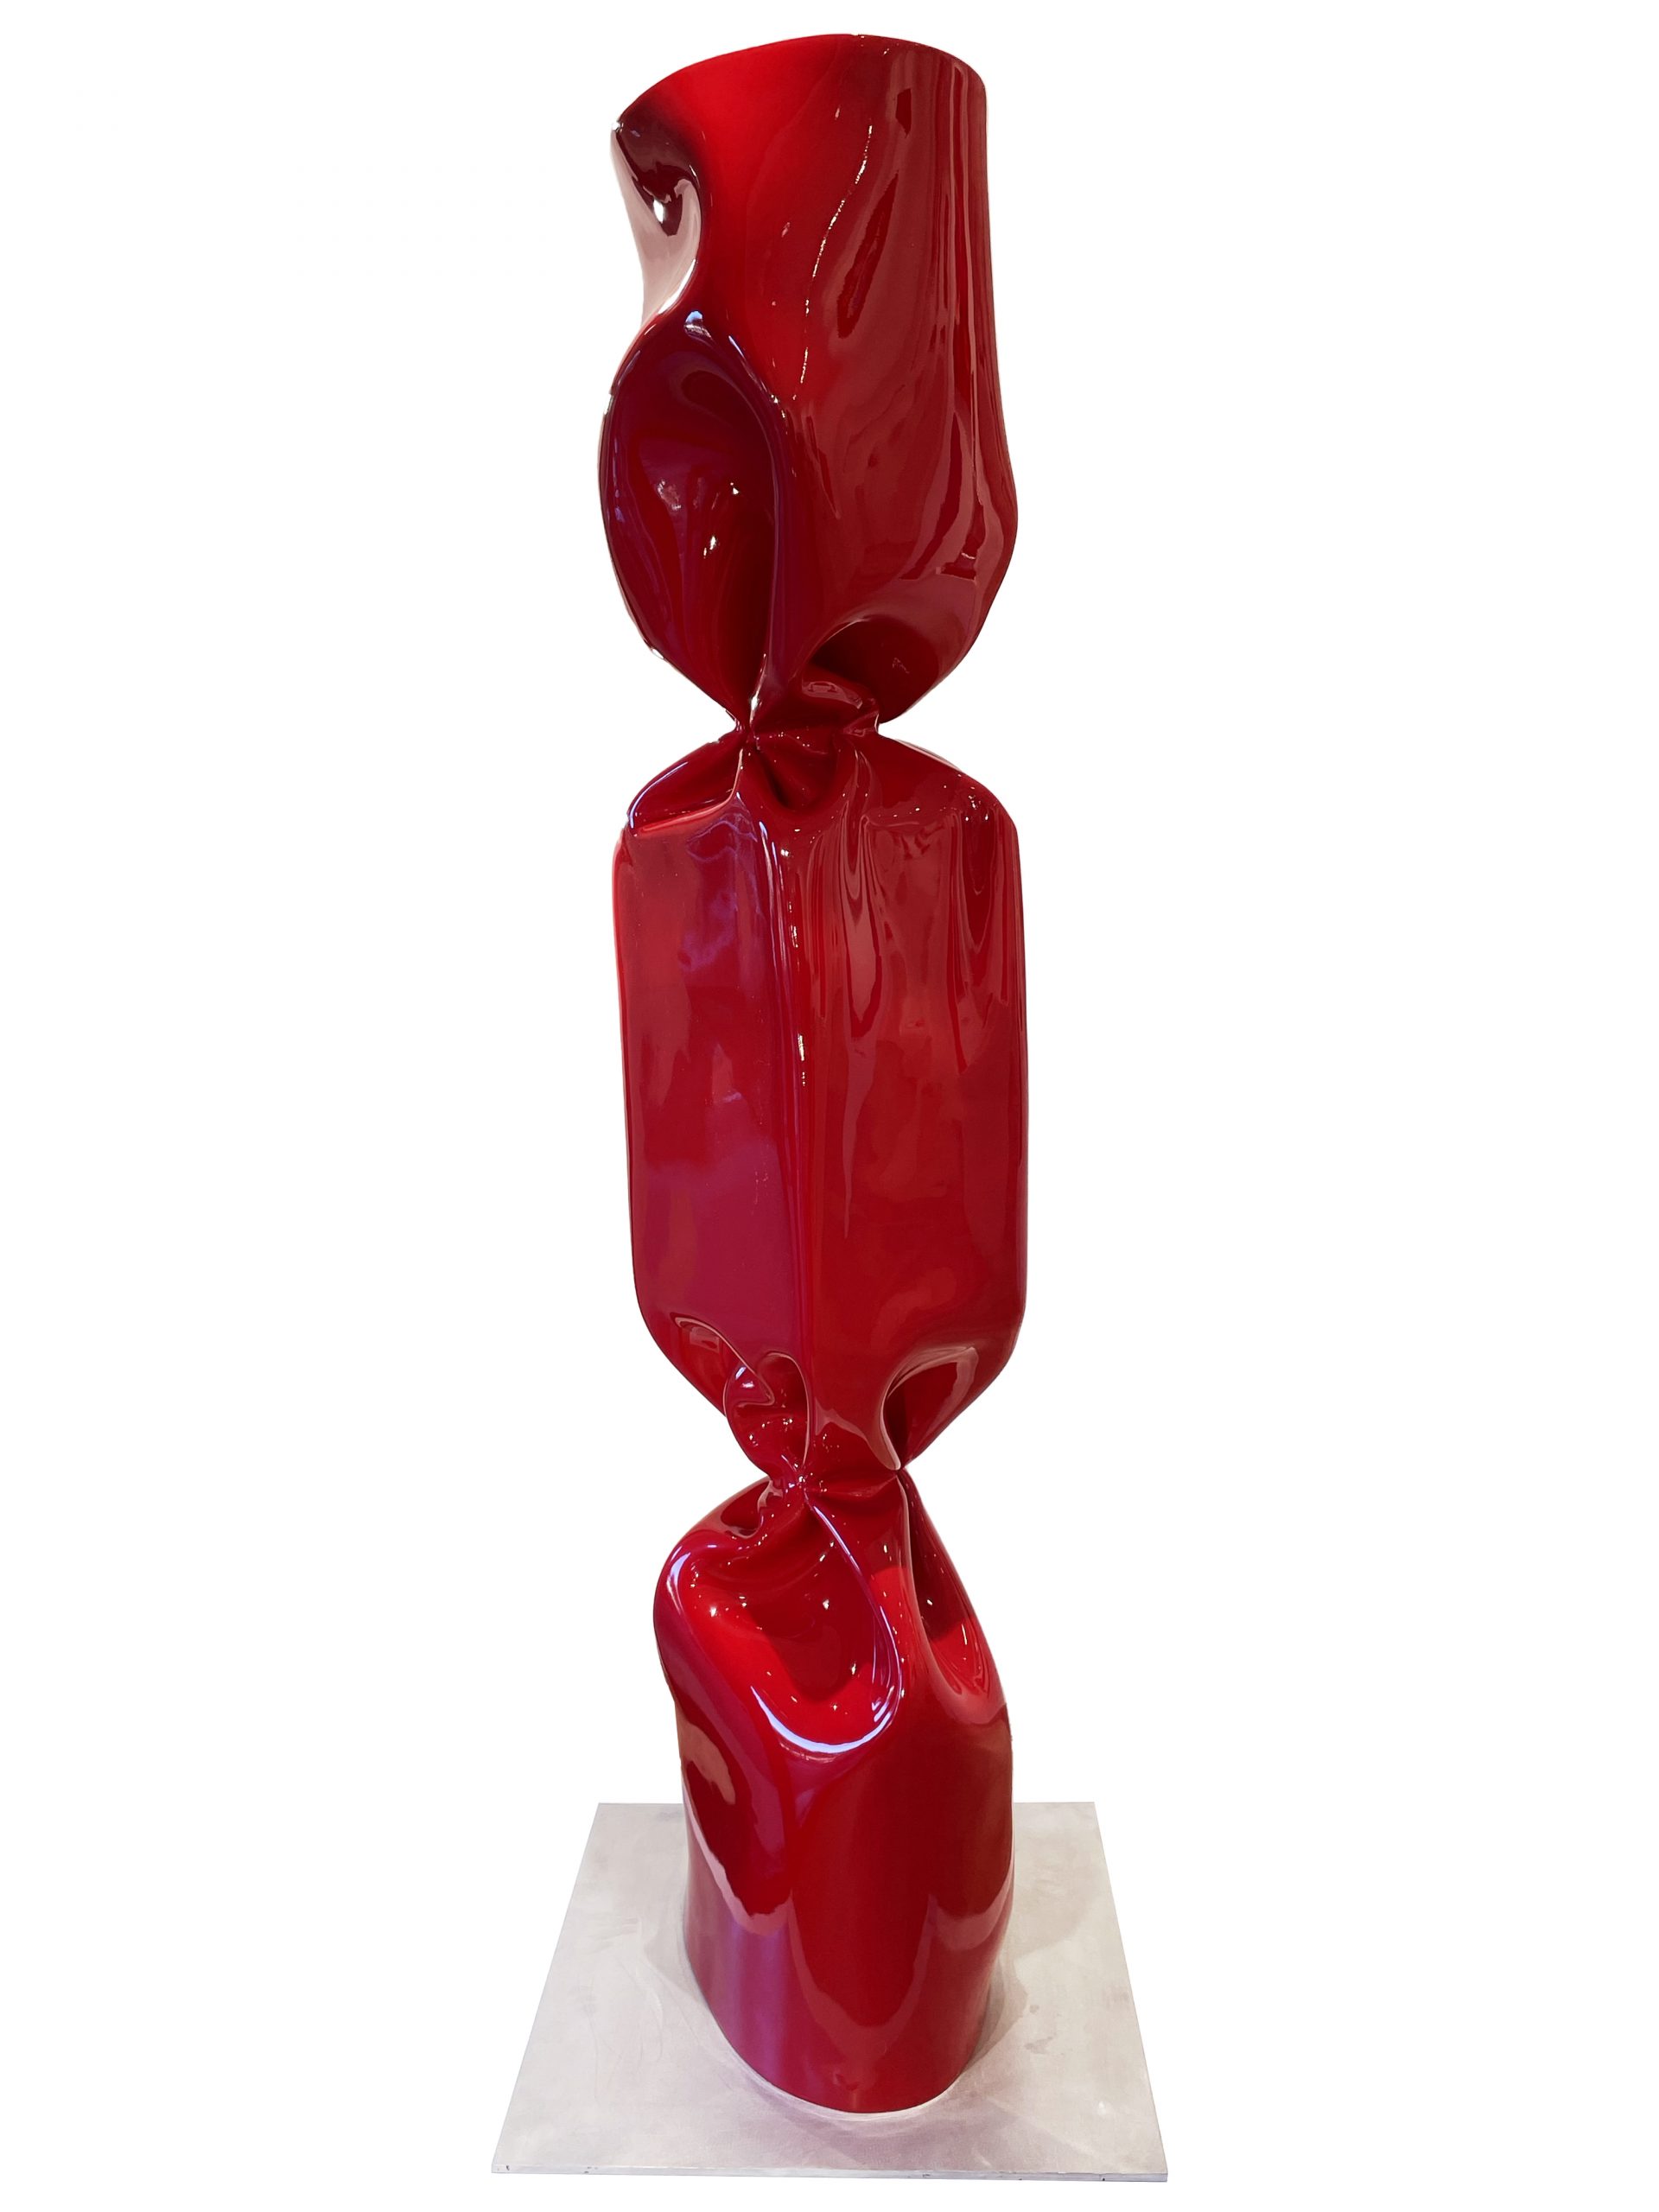 Laurence Jenk - Wrapping Bonbon Monumental Rouge 2020 Plexiglass 41 cm | 16 1/10 in Unique © Marciano Contemporary